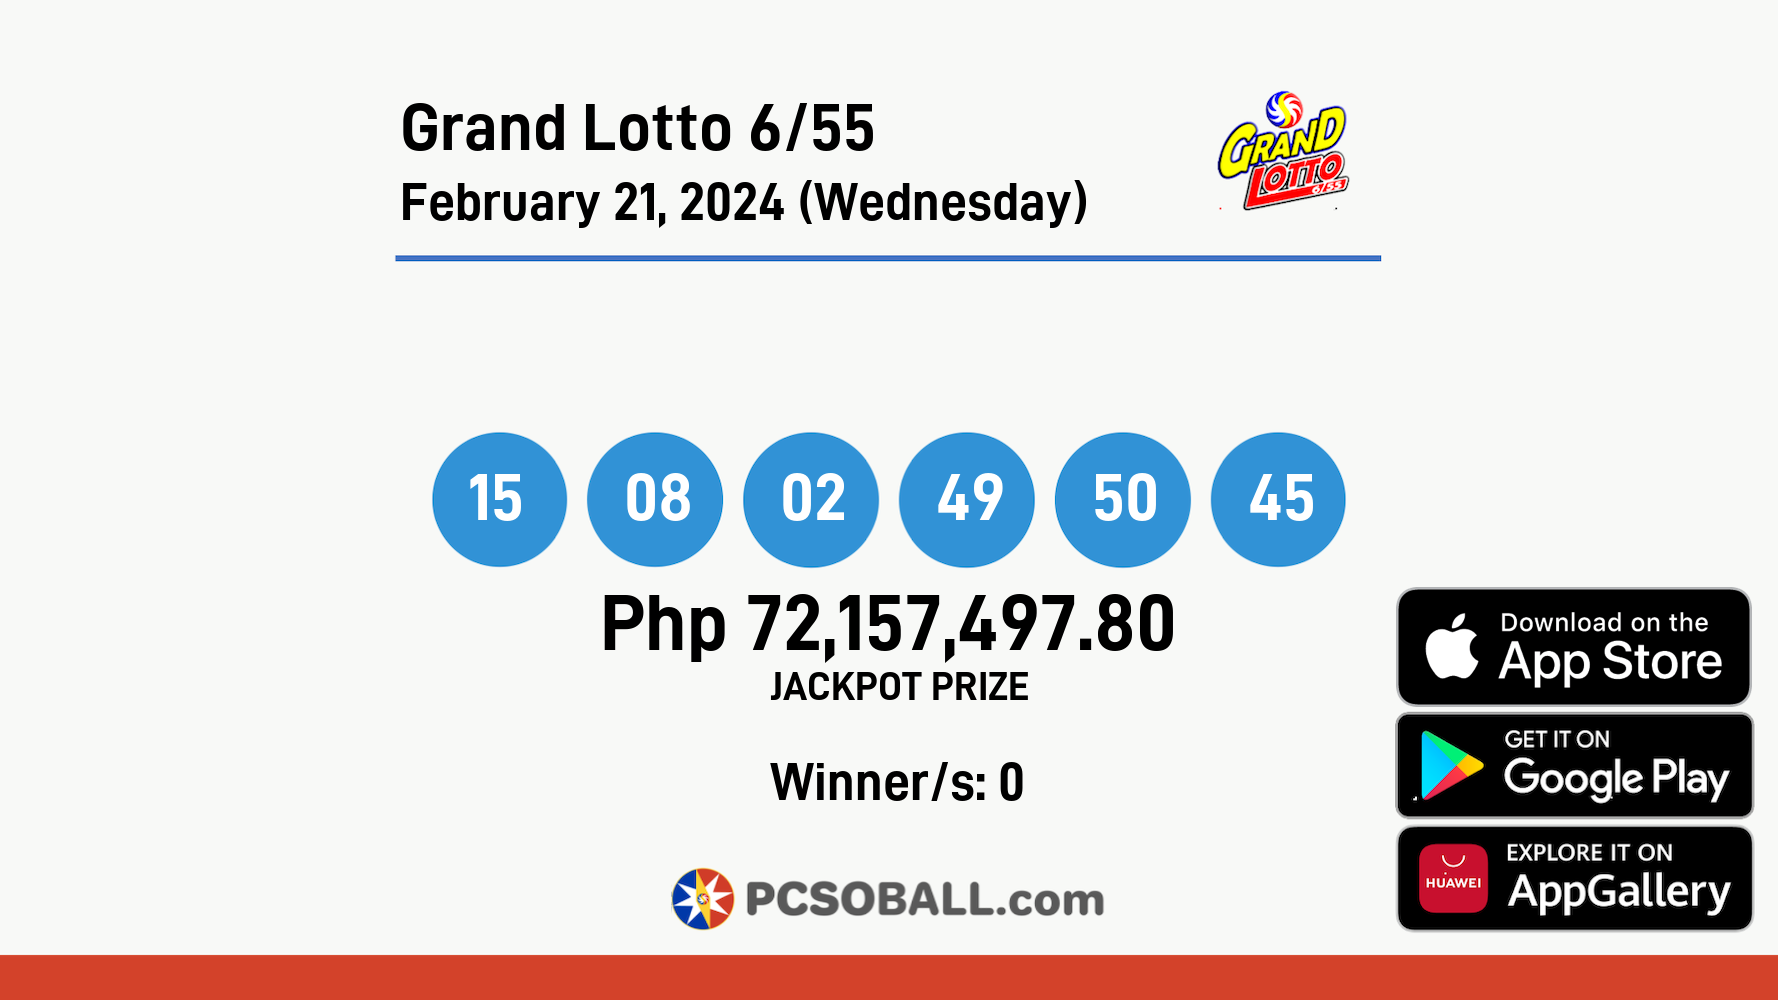 Grand Lotto 6/55 February 21, 2024 (Wednesday) Result